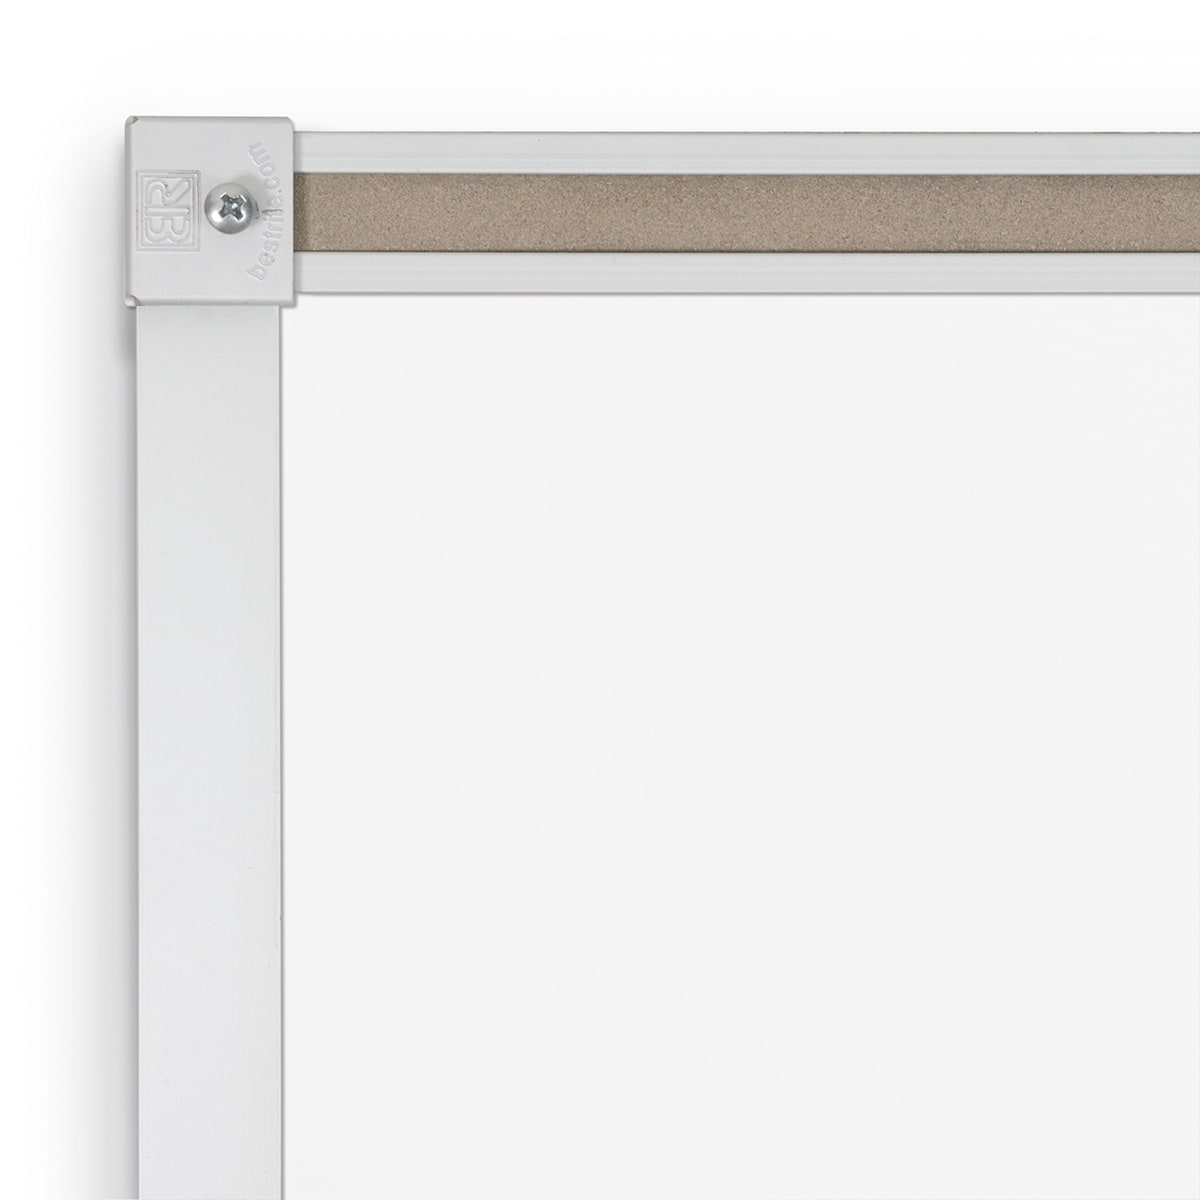 Mooreco ABC Porcelain Magnetic Markerboard with Map Rail - 2'H x 3'W (Mooreco 2H2NB-M) - SchoolOutlet